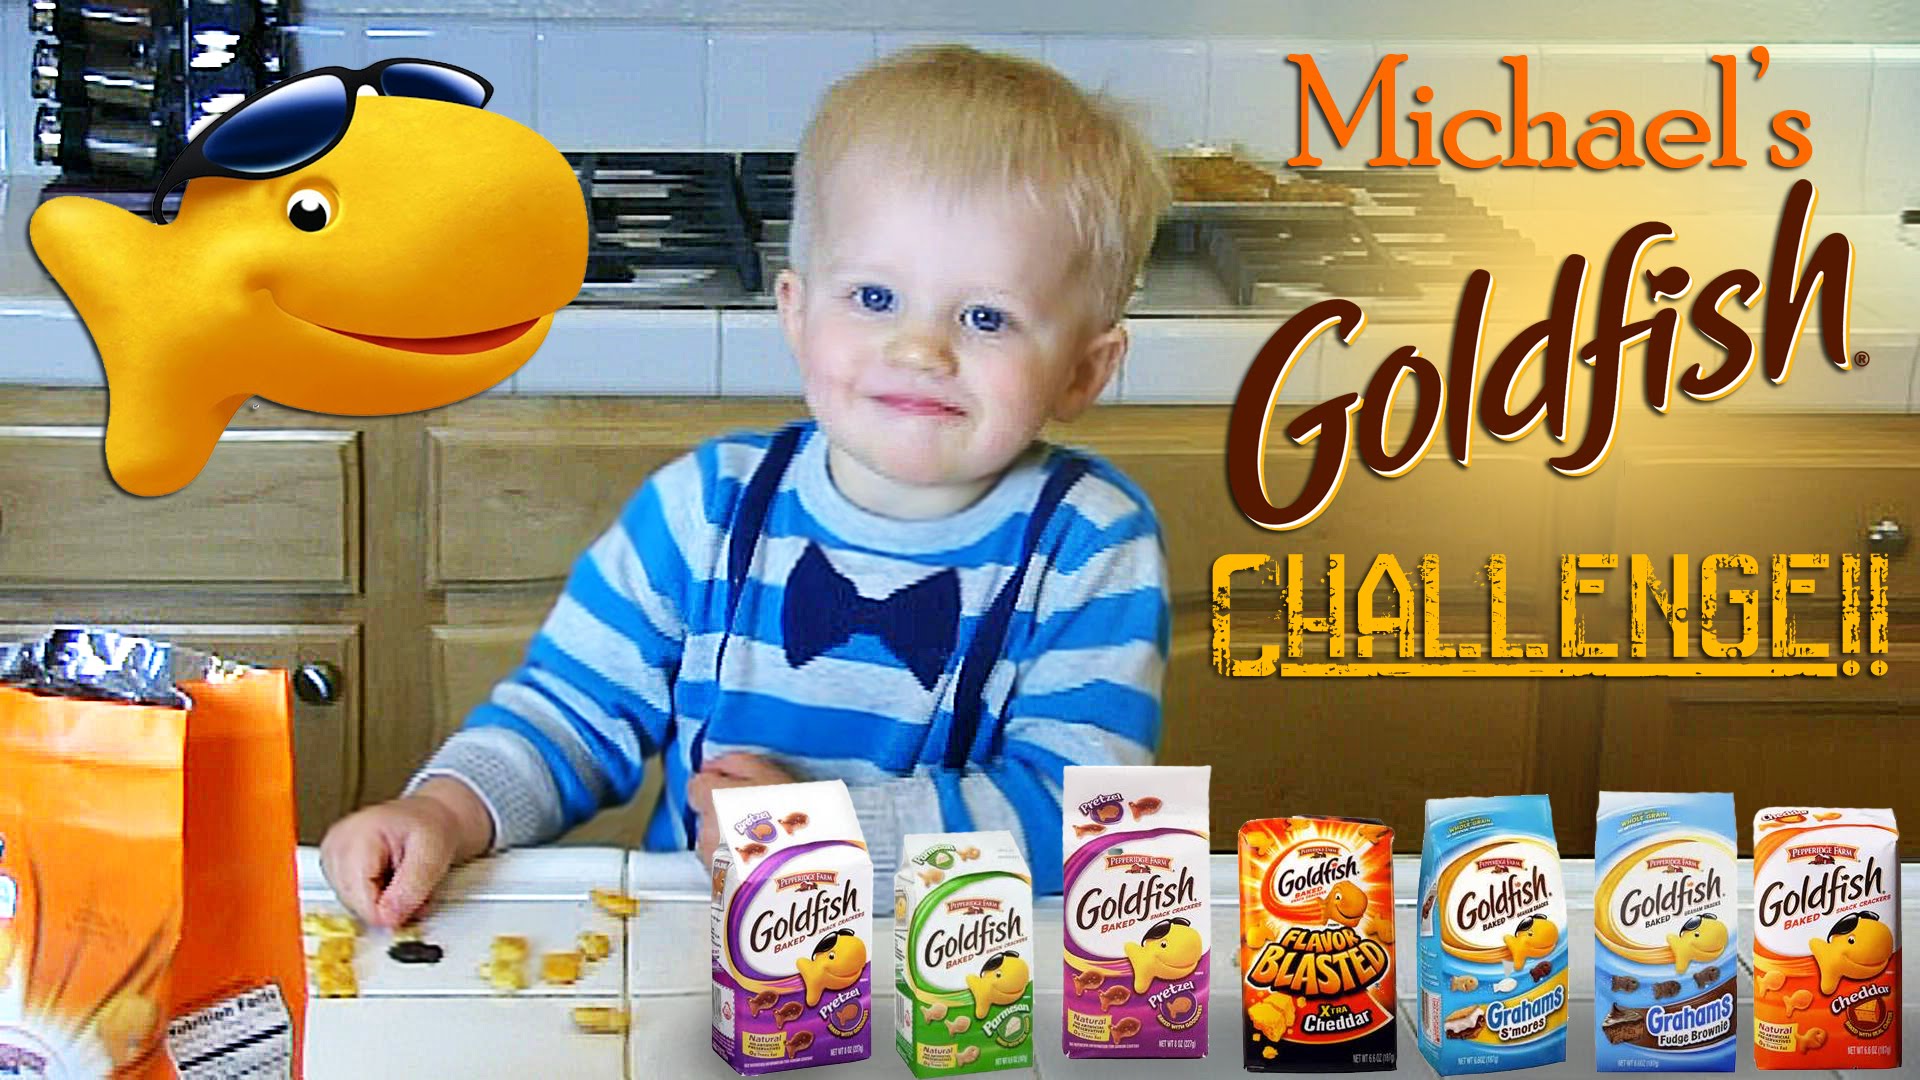 Michael Takes on the GOLDFISH CHALLENGE!